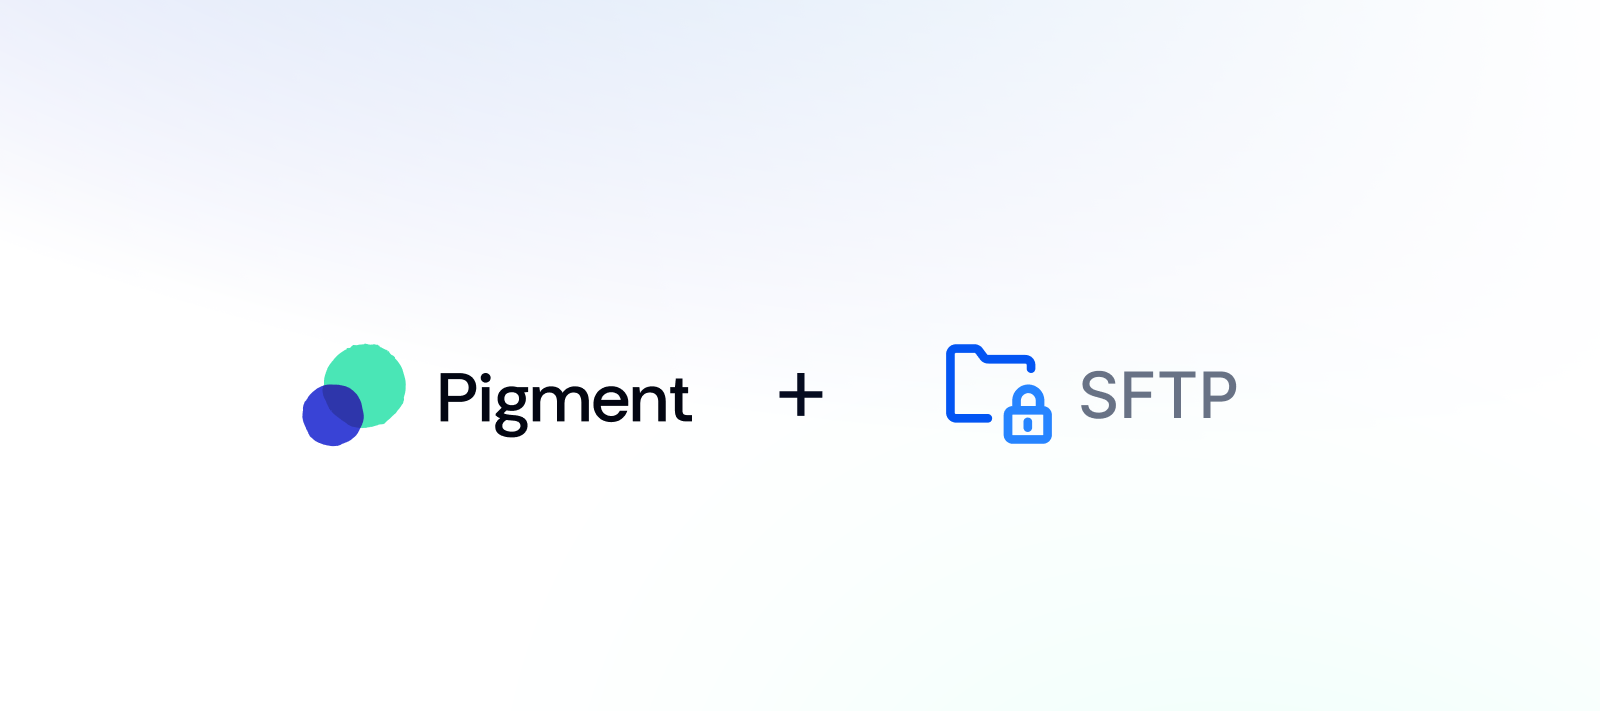 Connect Pigment with an SFTP server